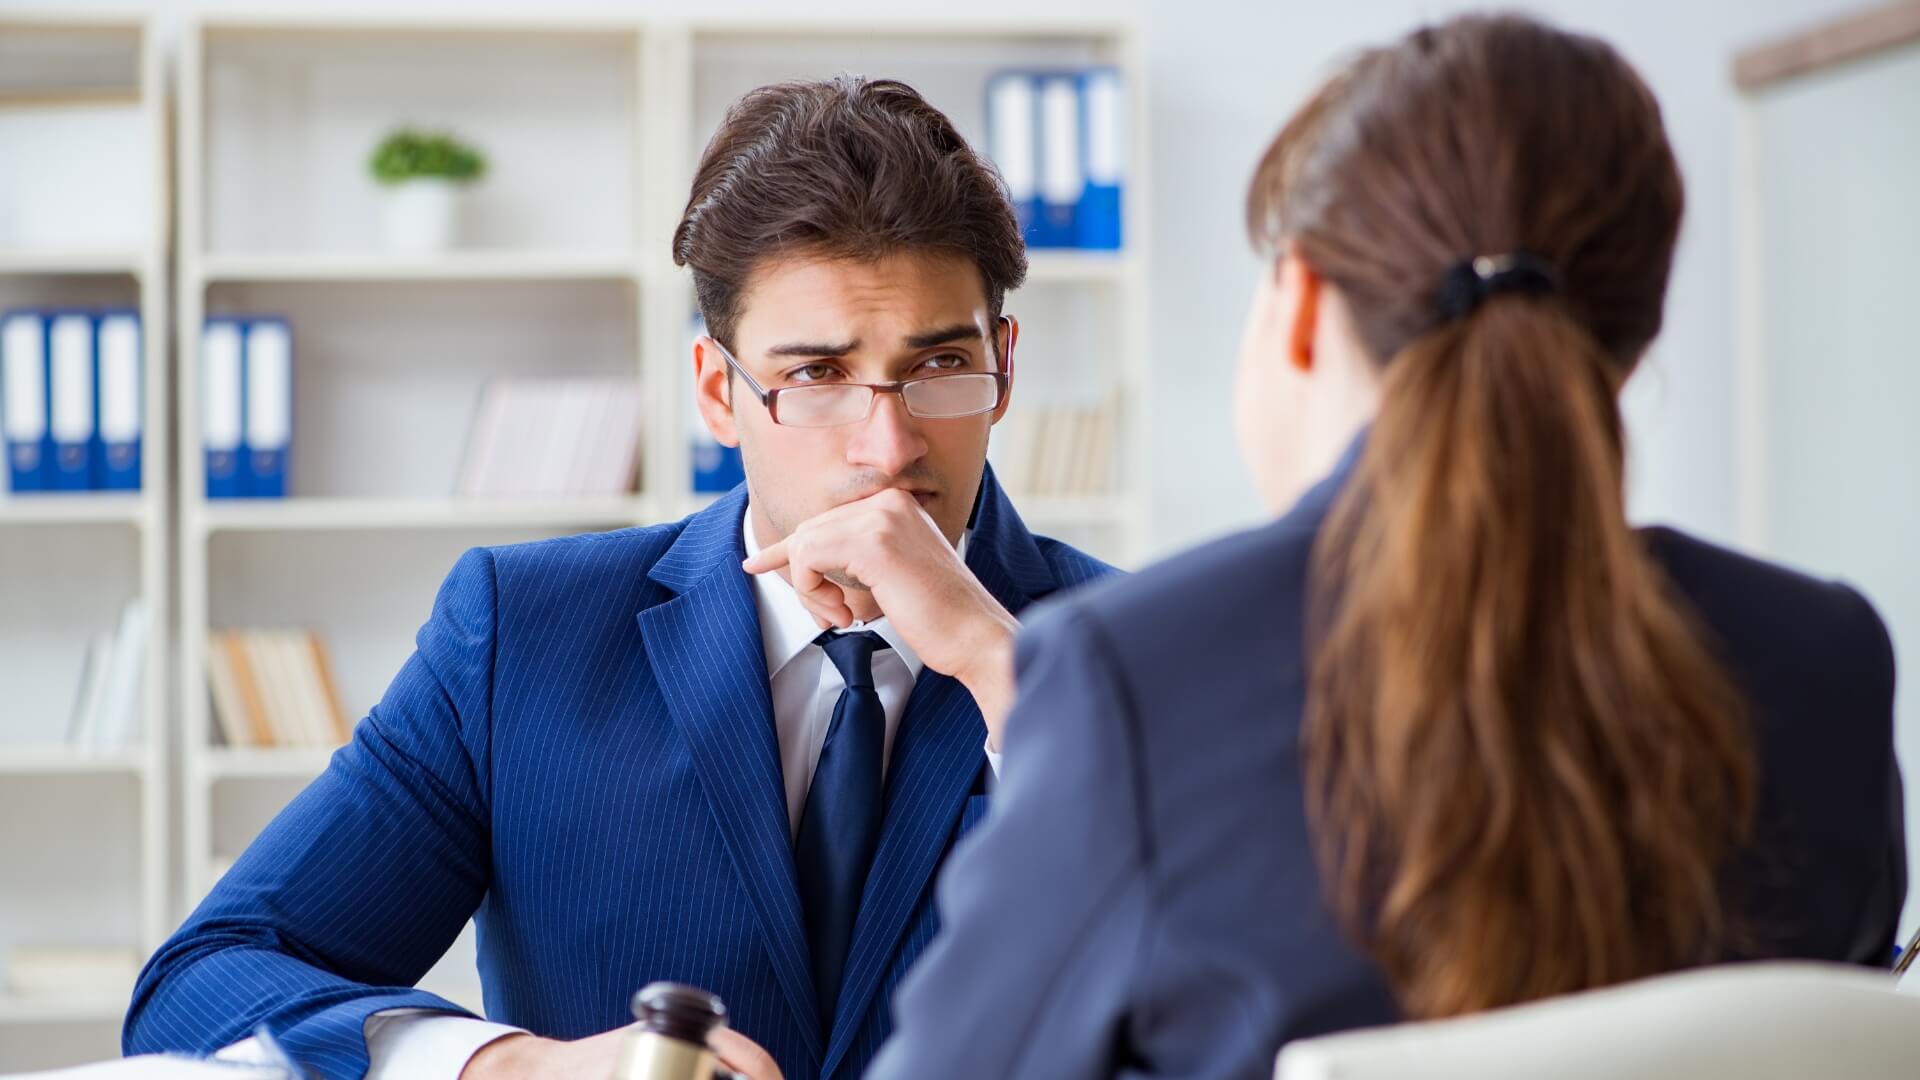 An image of a lawyer discussing sexual offences made to their client.